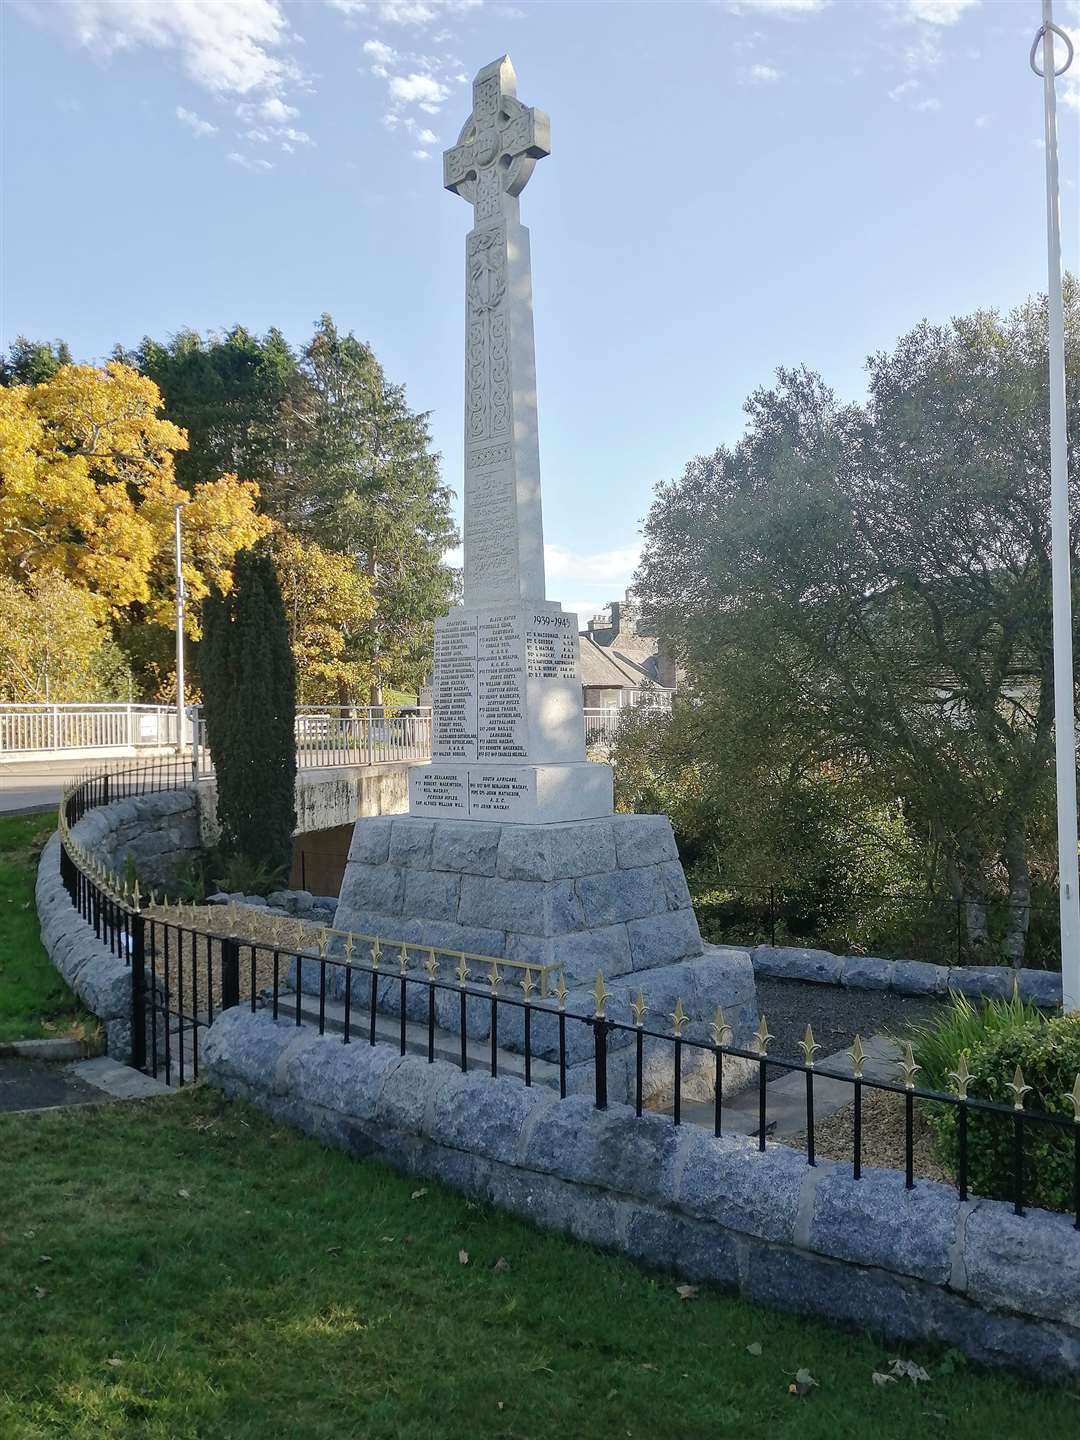 Rogart War Memorial has been refurbished thanks to community benefit funding from local wind farms.